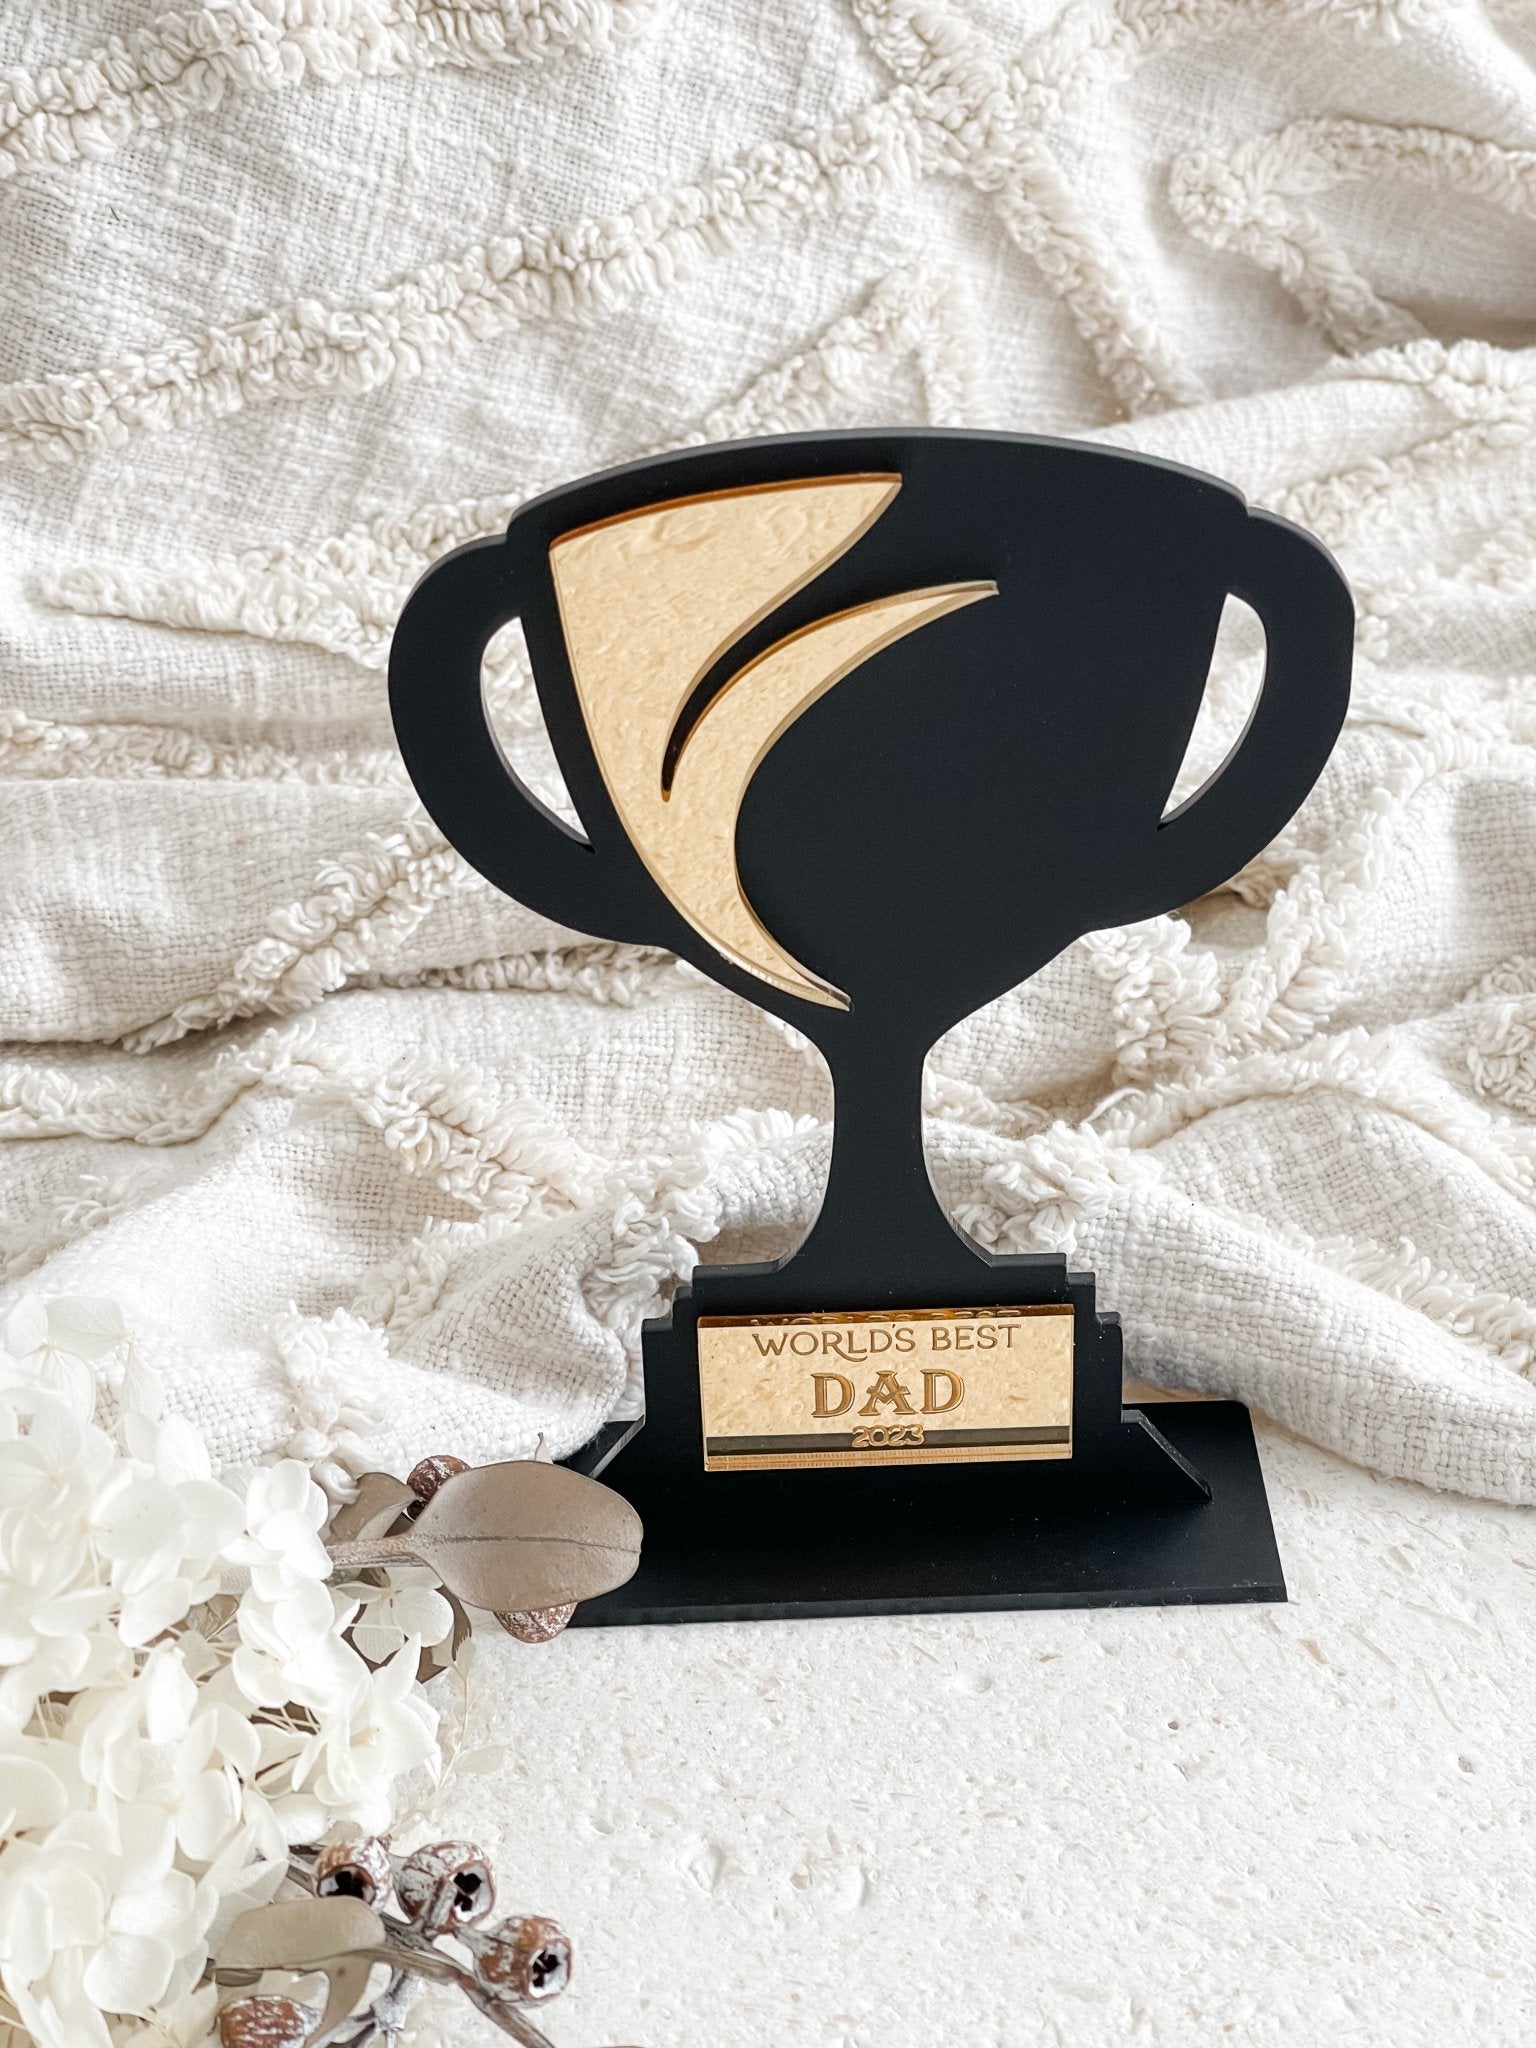 World’s Best Dad Trophy - The Humble Gift Co.